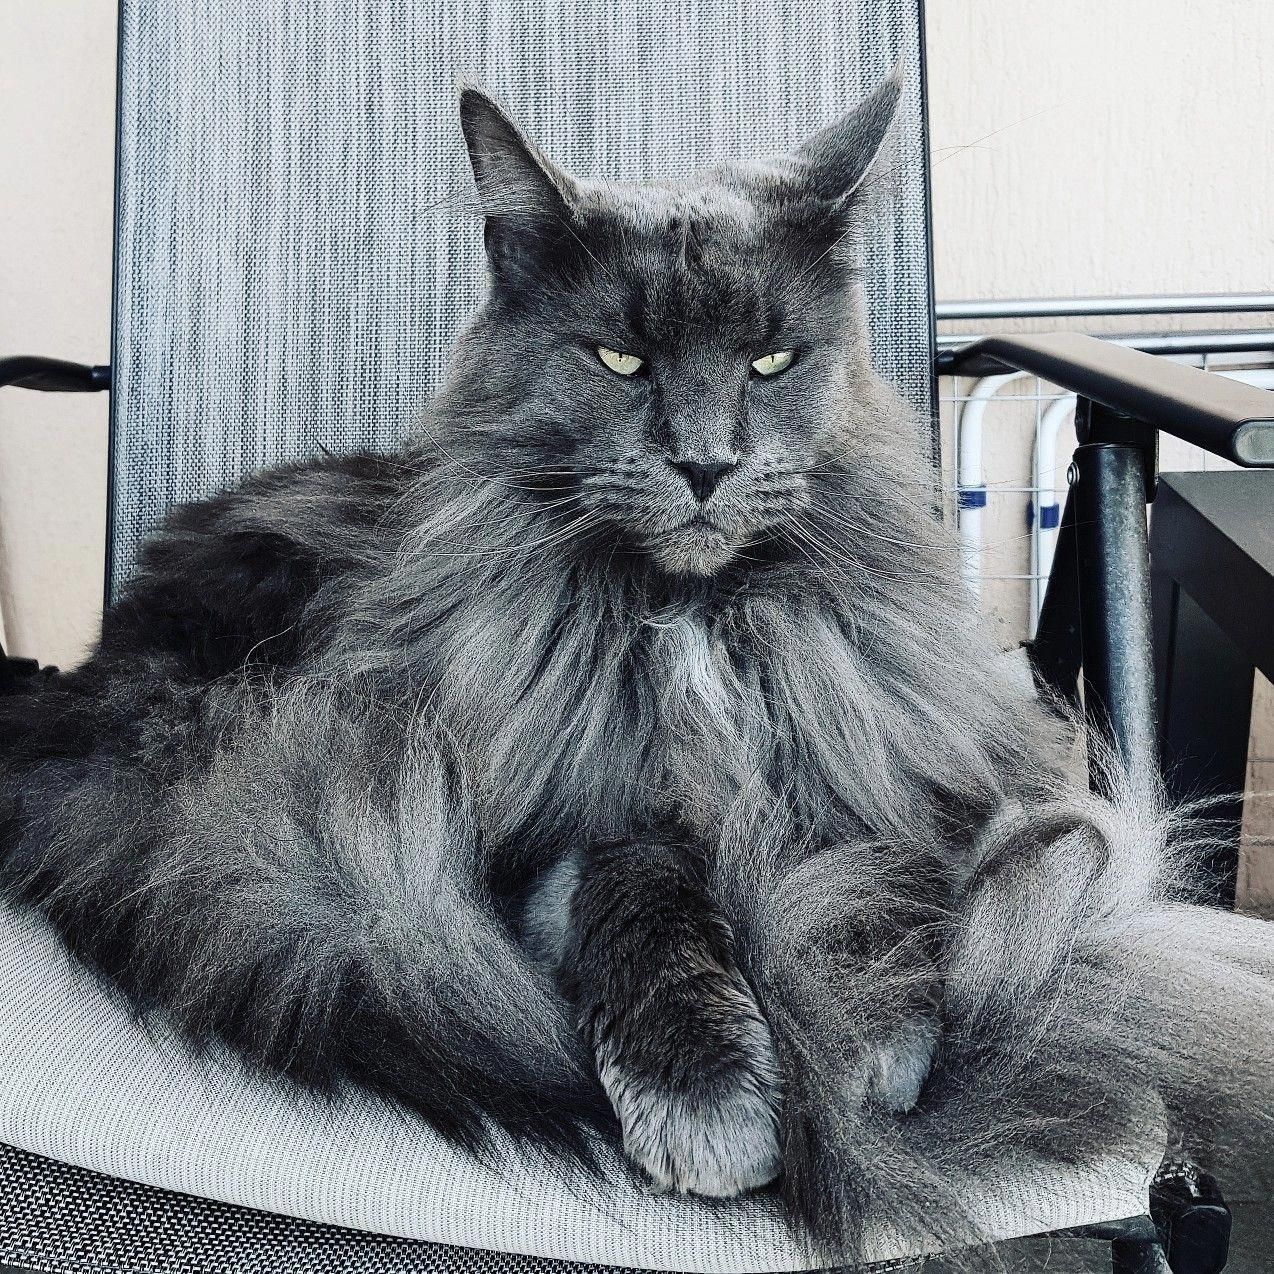 Full breed maine coon cats for sale